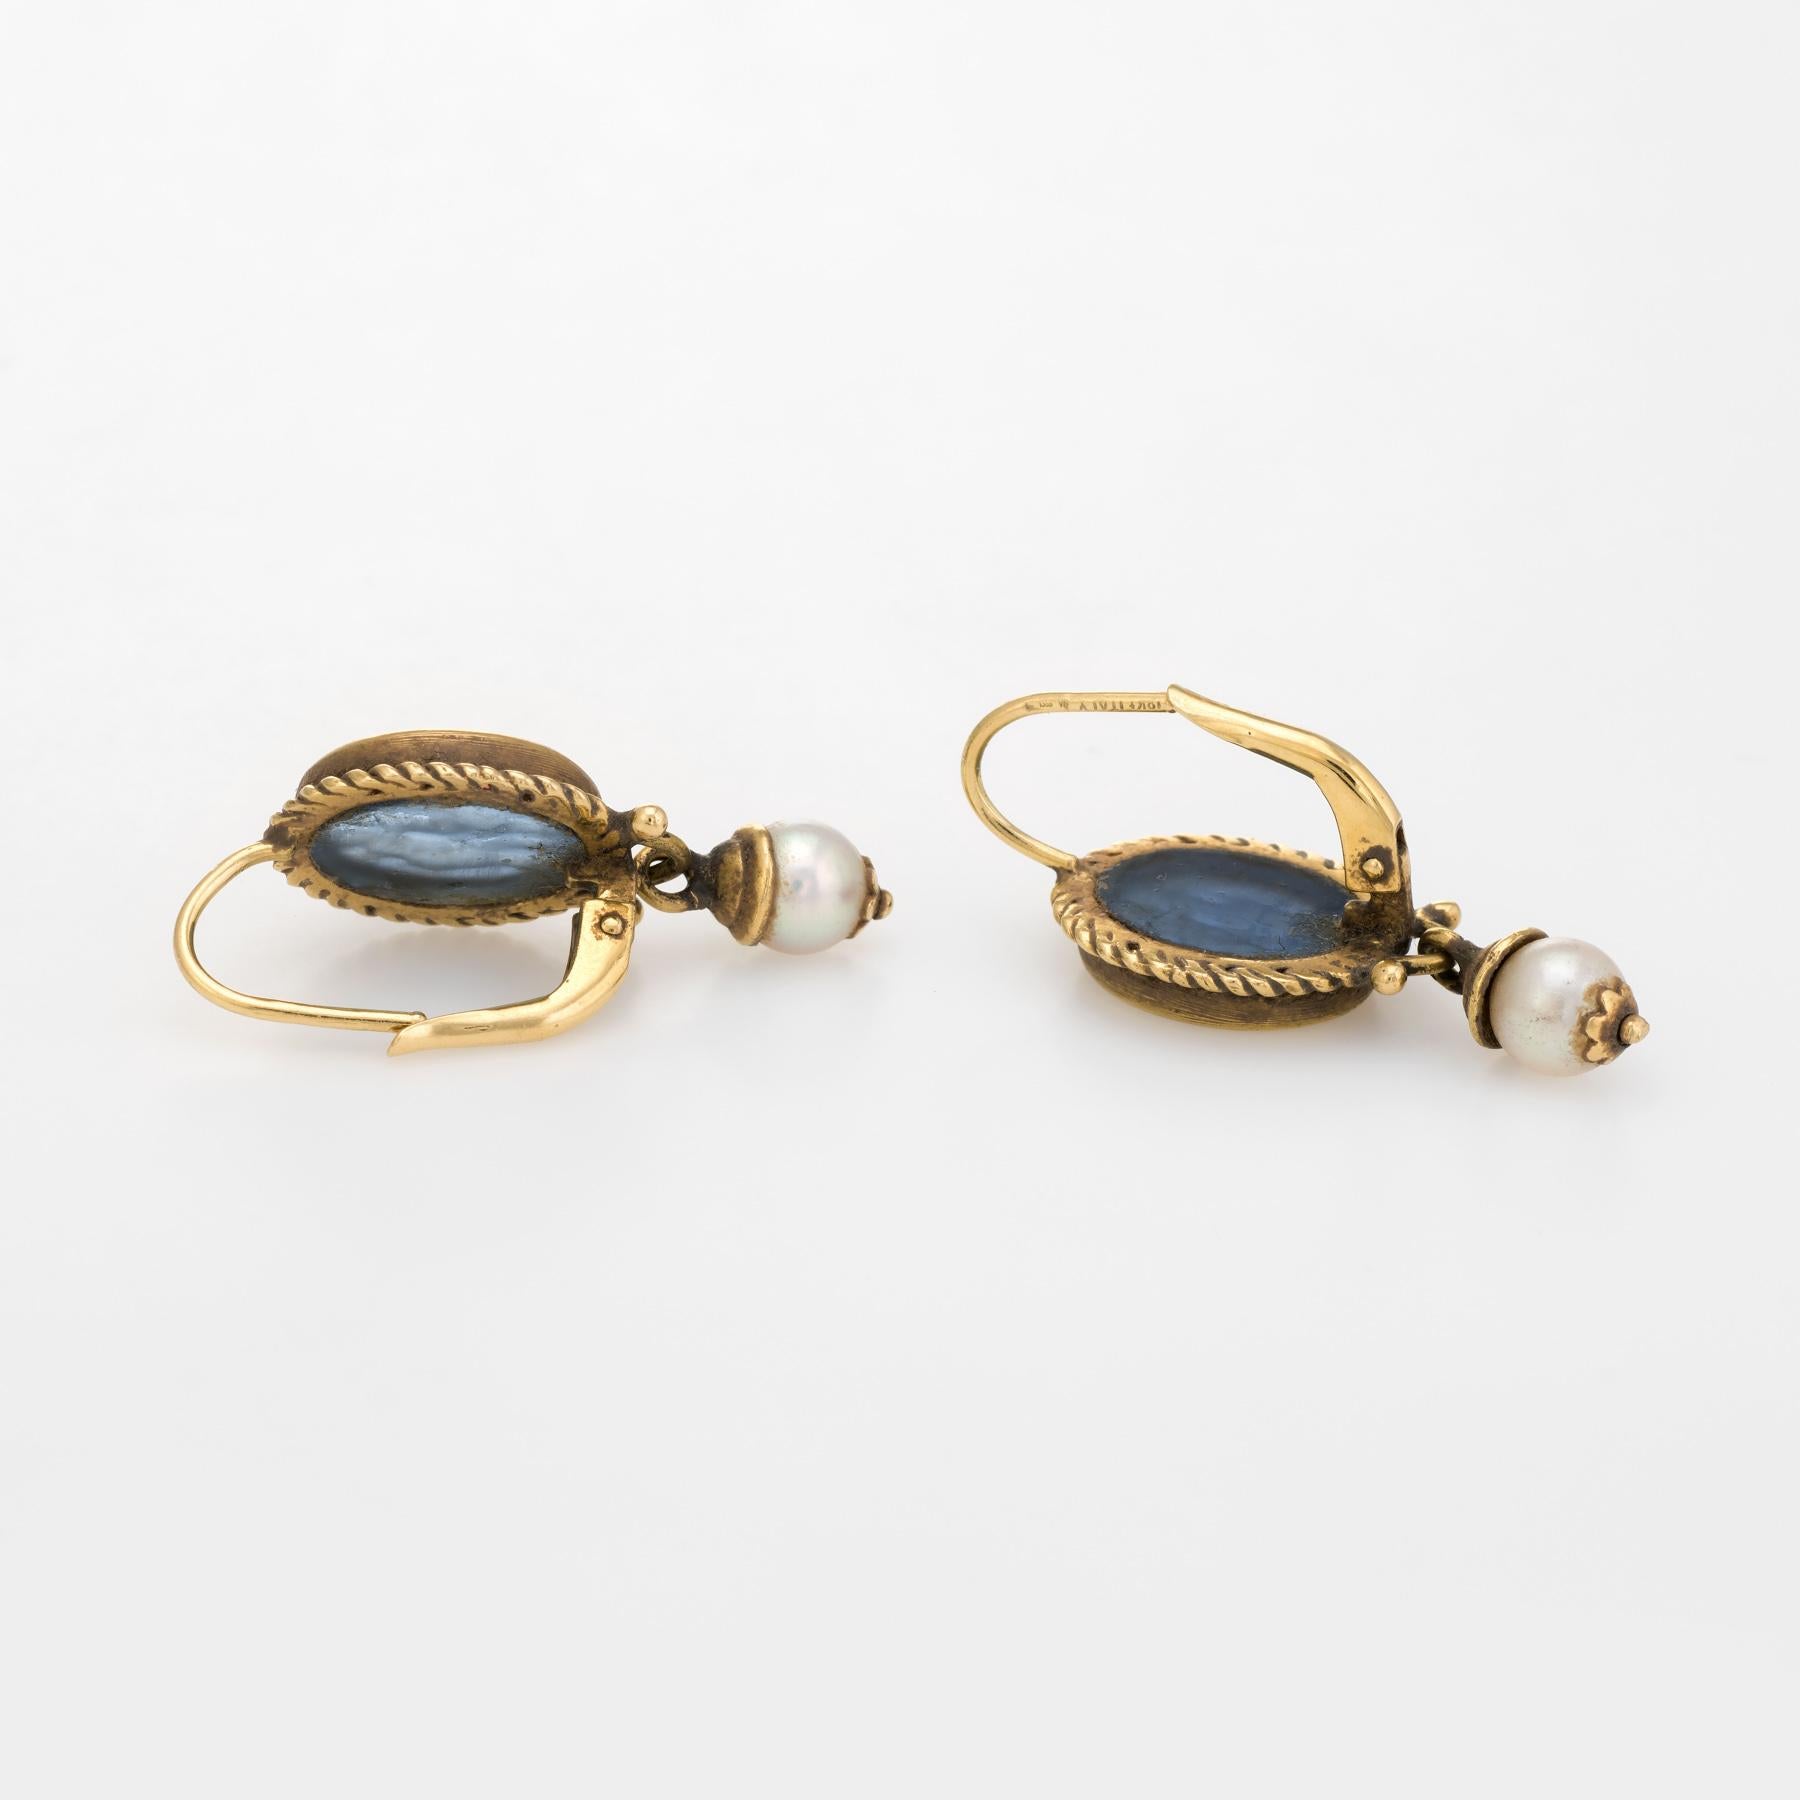 Finely detailed pair of vintage earrings, crafted in 18 karat yellow gold.

Cherubs are etched into venetian glass and set into ornate oval shaped mounts. Two 5.5mm cultured pearls adorn the lower drops. 

The earrings are in excellent